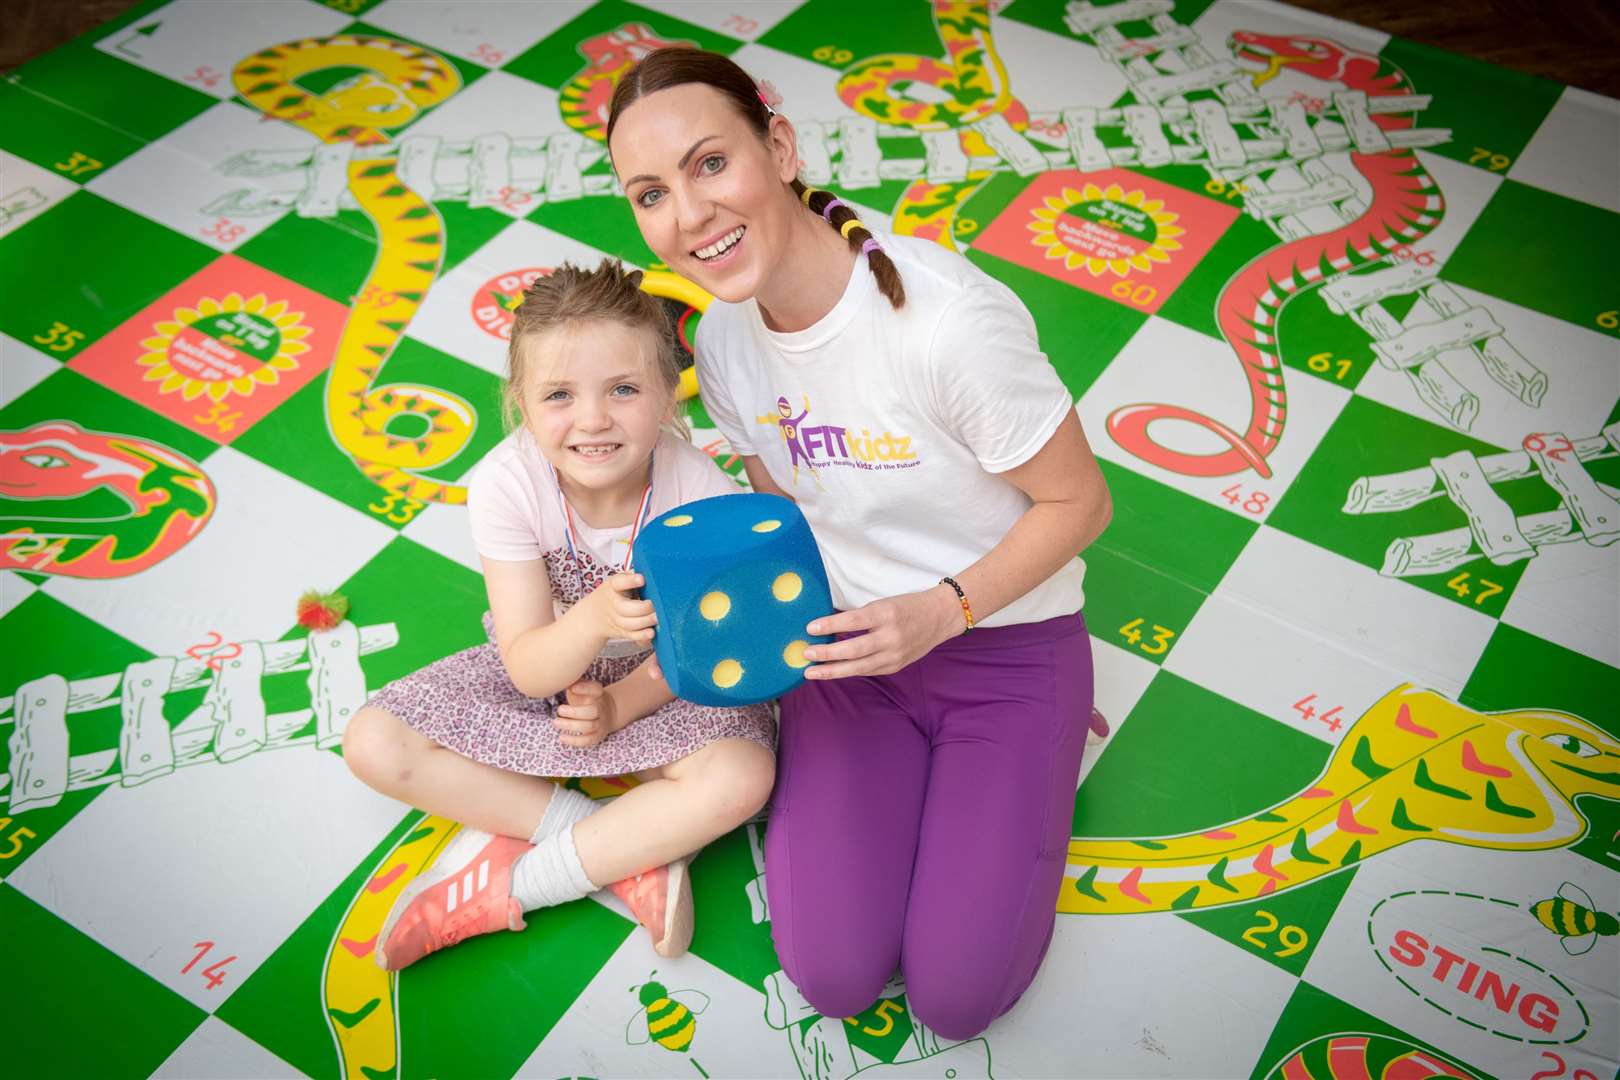 Playing snakes and ladders at the Summer Kids Club at the Eastgate Shopping Centre are Harriett Urquhart and Amy Mullen. Pictures: Callum Mackay.